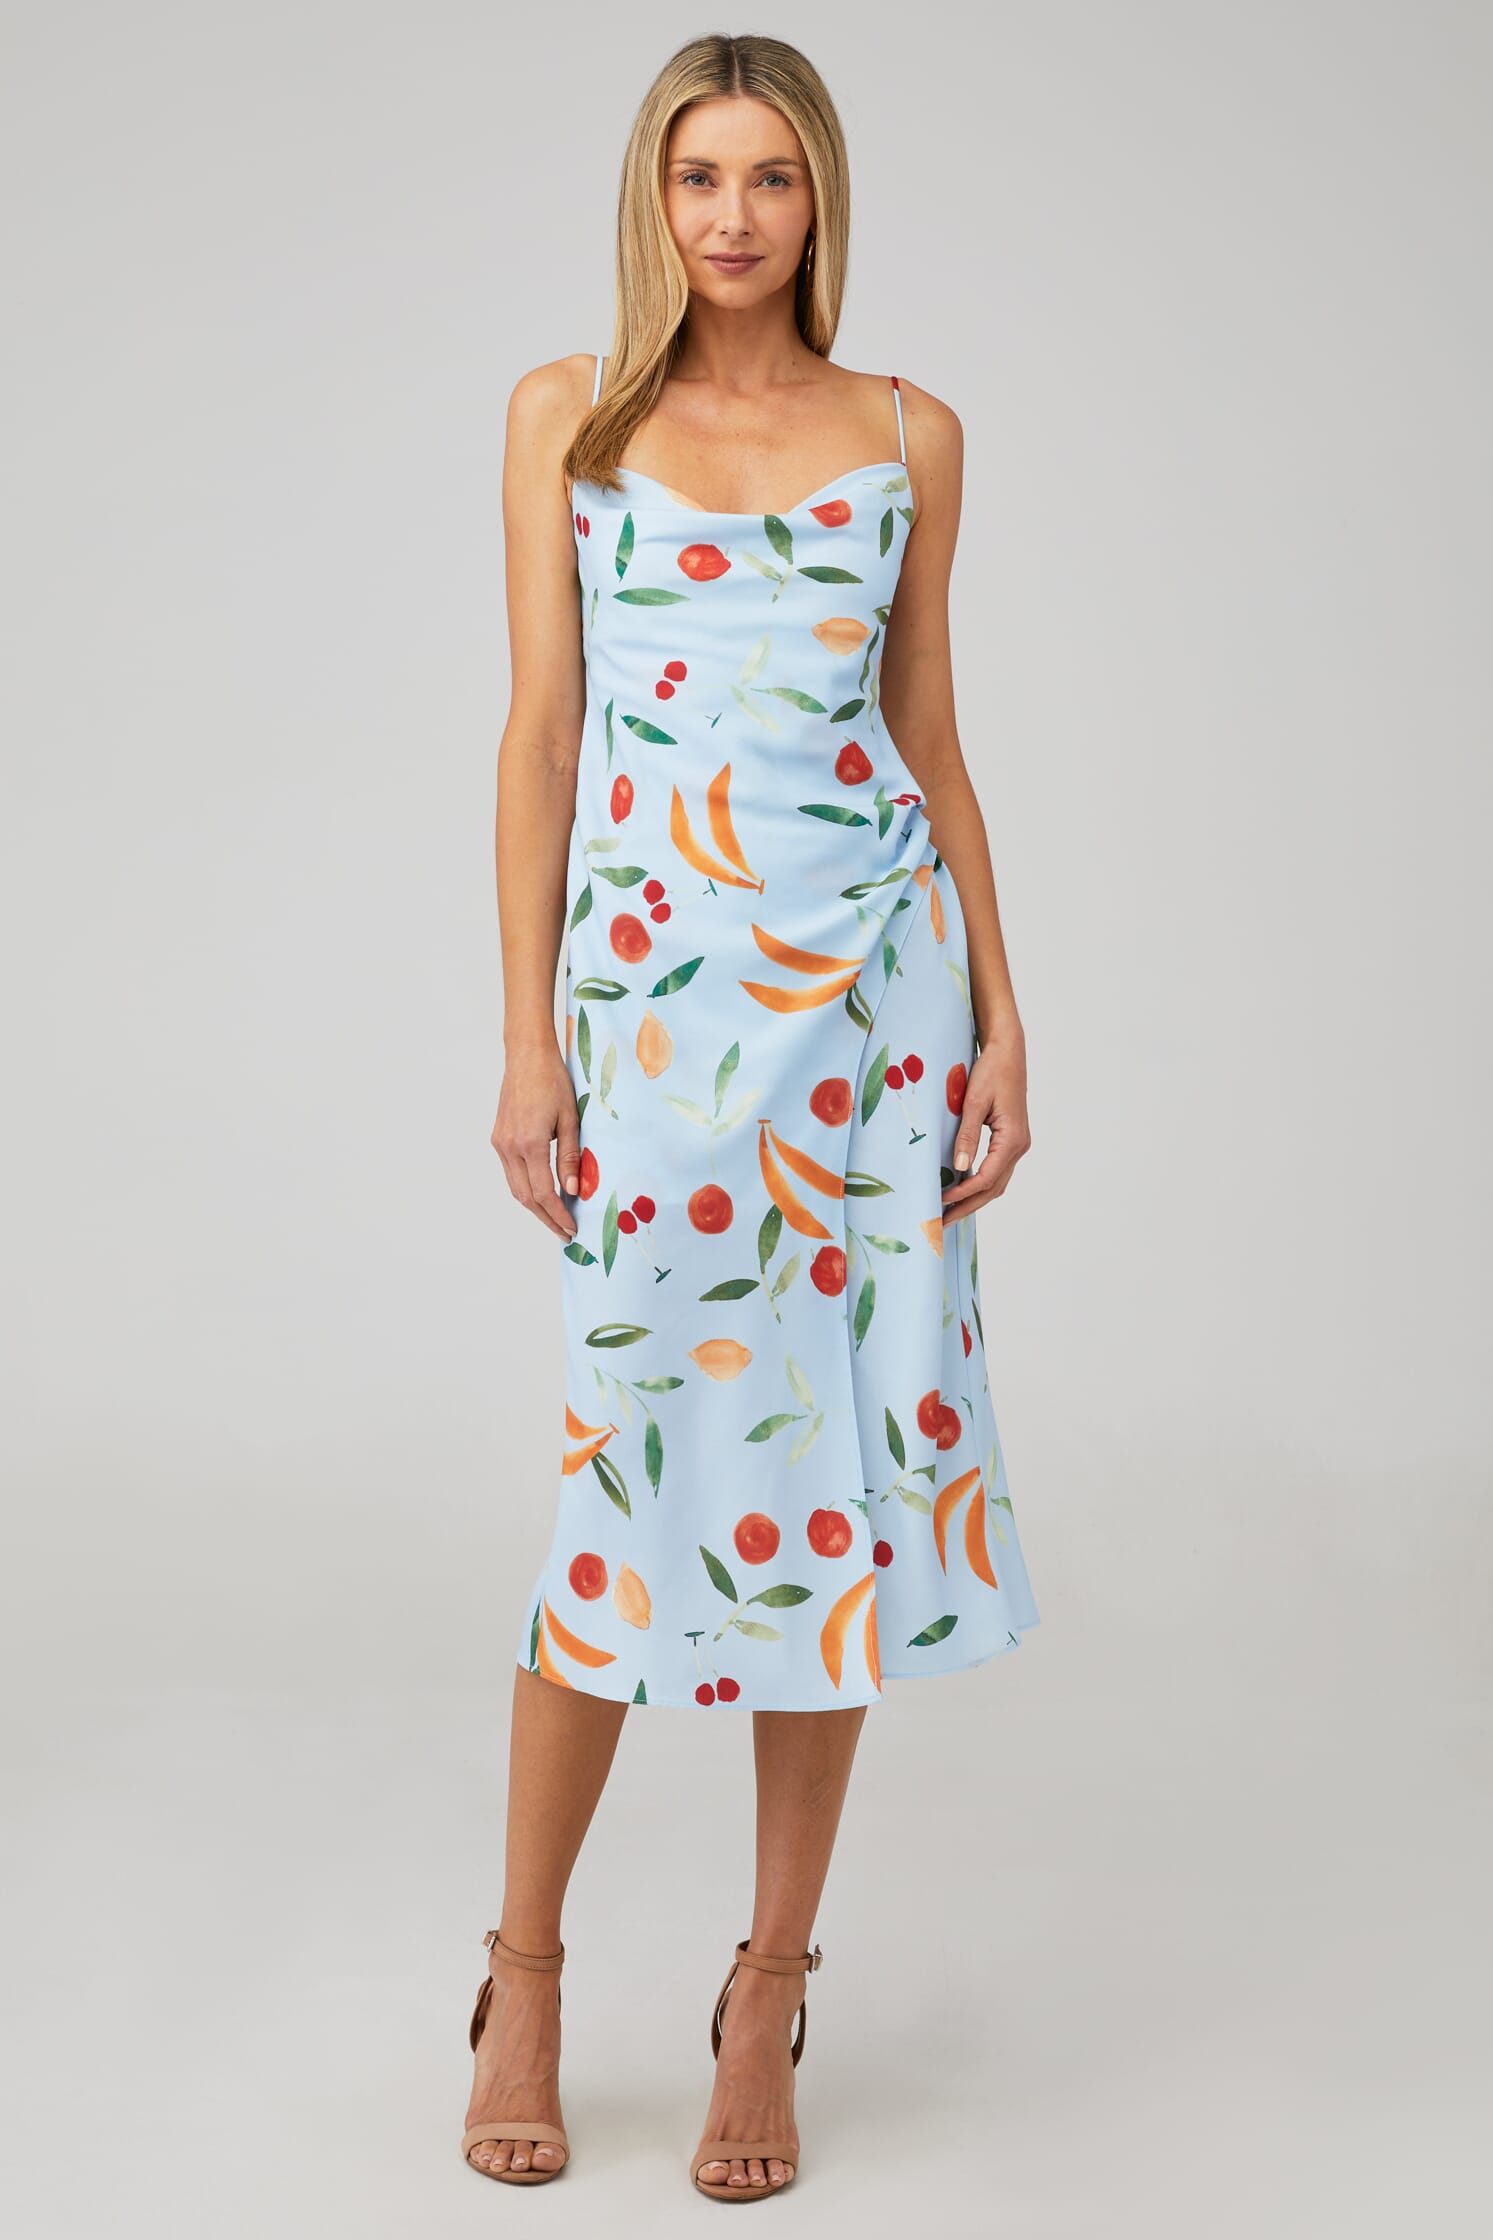 Finders Keepers Calypso Midi Dress in Blue Fruitbowl